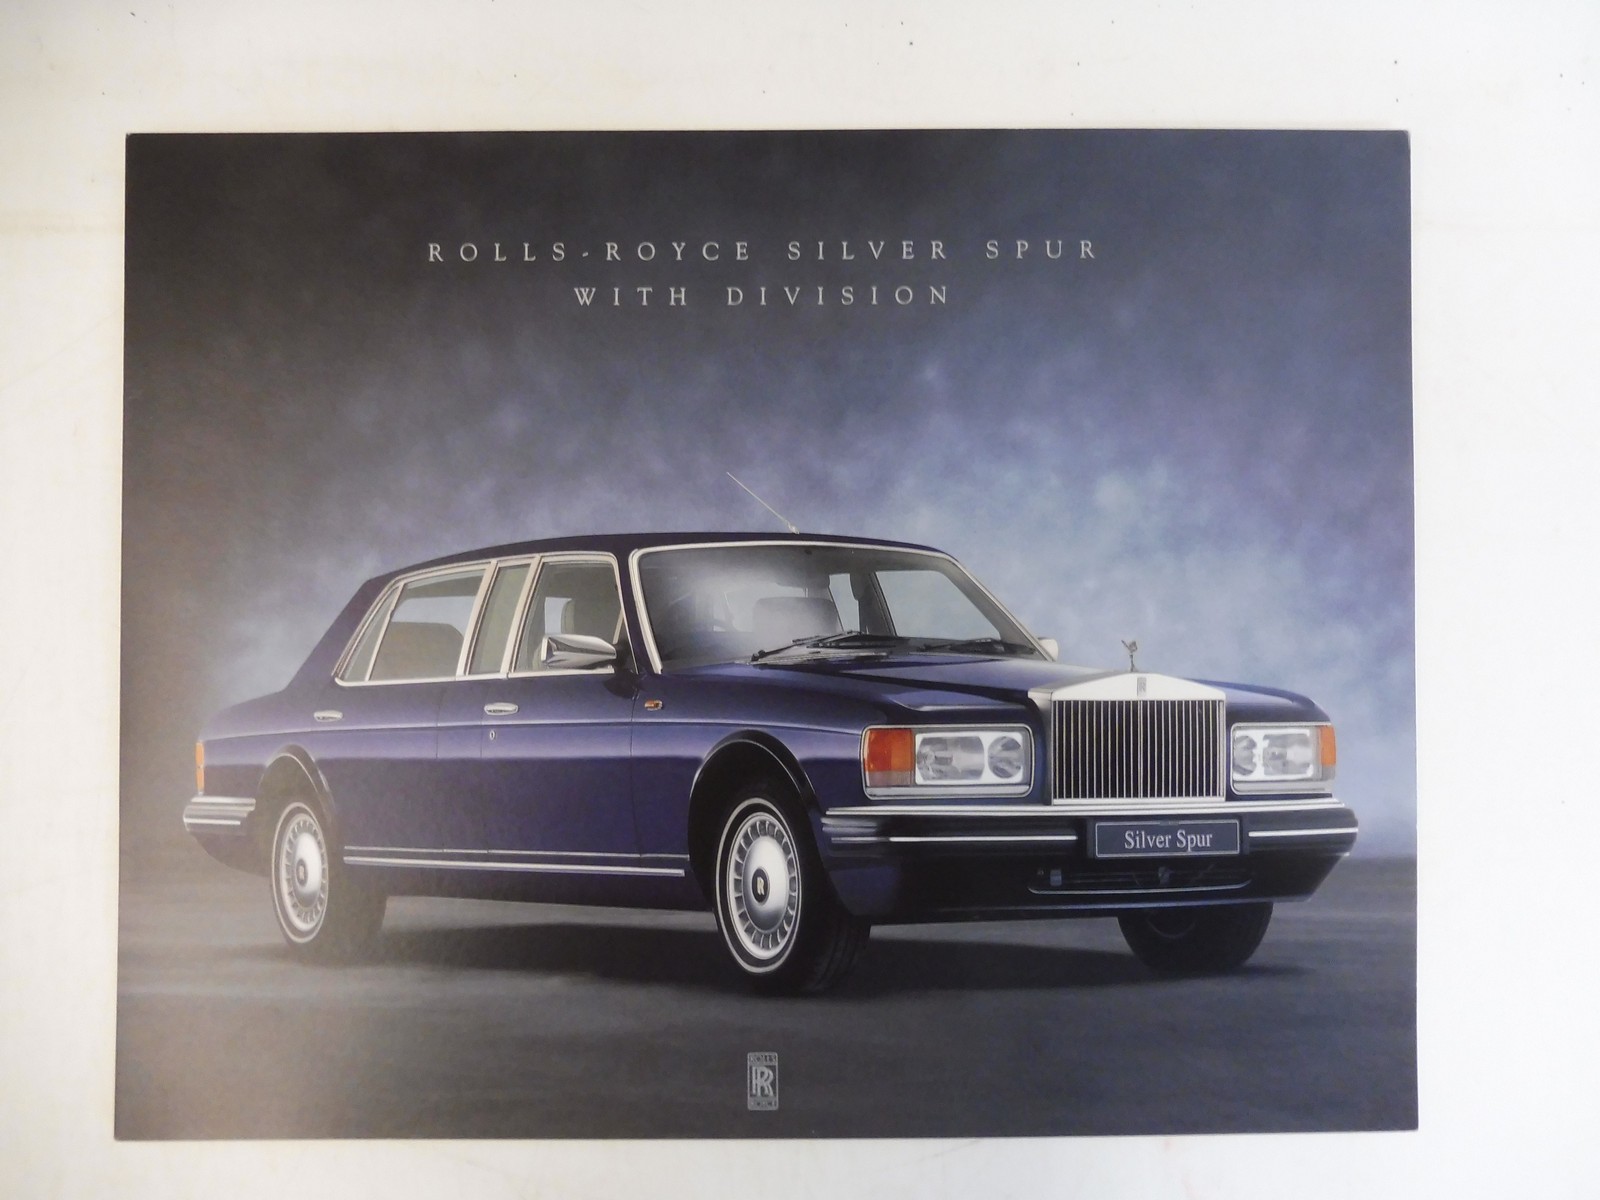 A Rolls-Royce Silver Spur sales booklet.